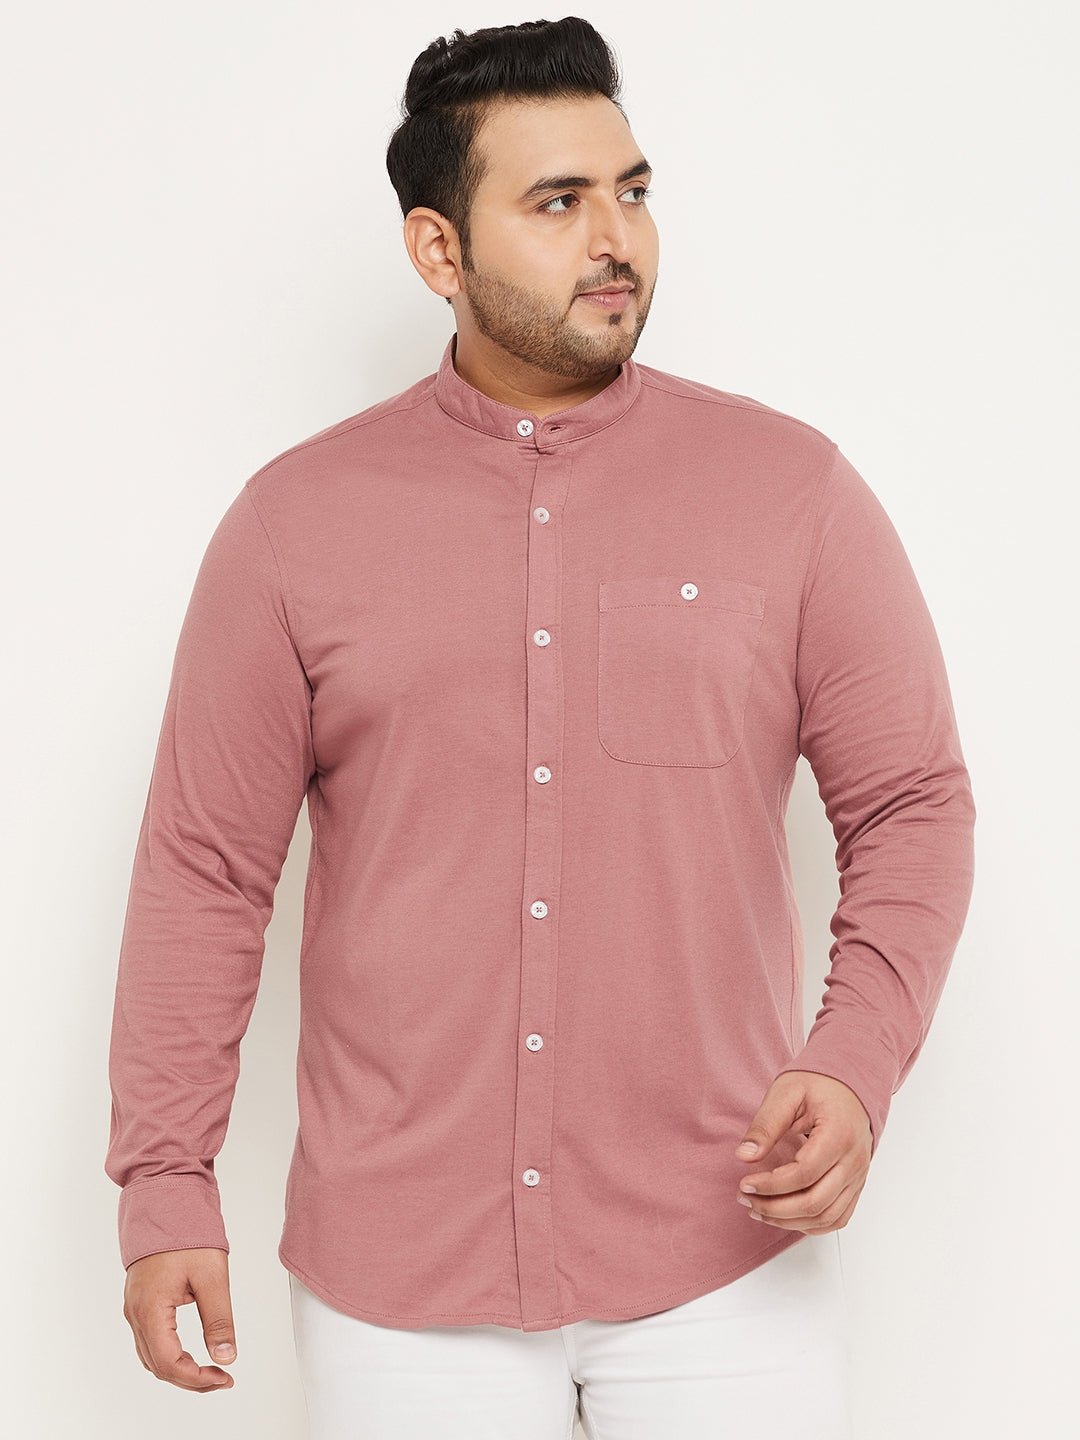 Mauve Pink Plus Size Full Sleeve Casual Shirt - clubyork